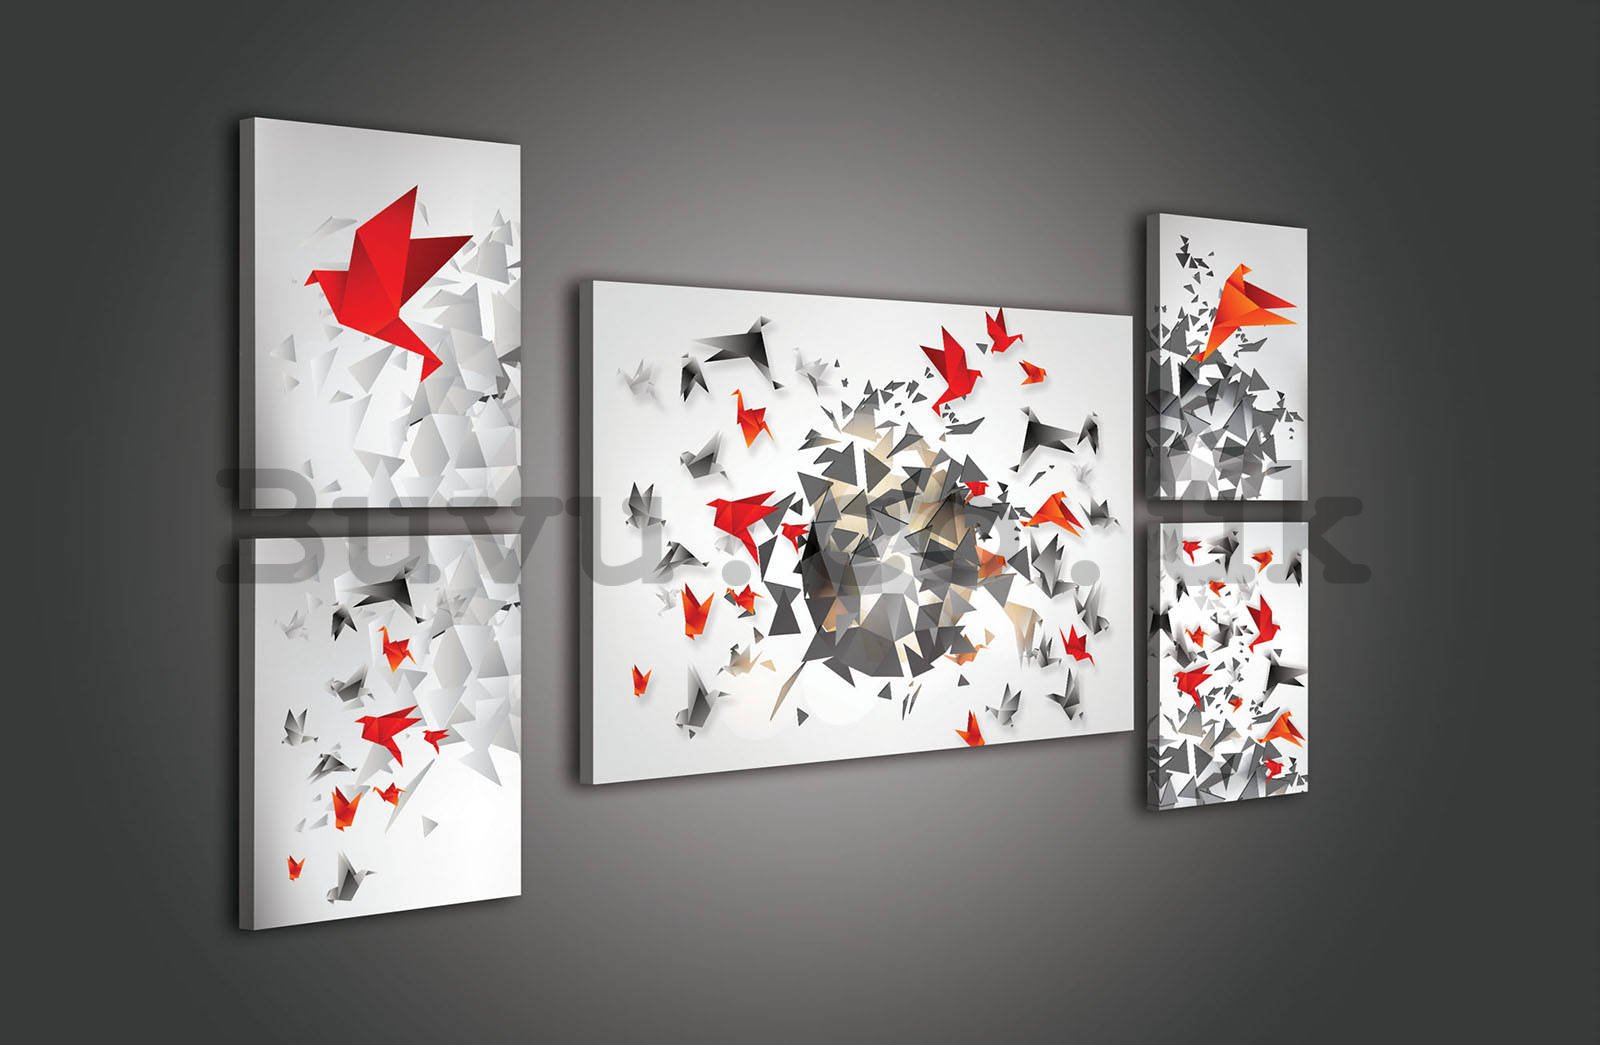 Painting on canvas: Origami (1) - set 1pc 70x50 cm and 4pc 32,4x22,8 cm